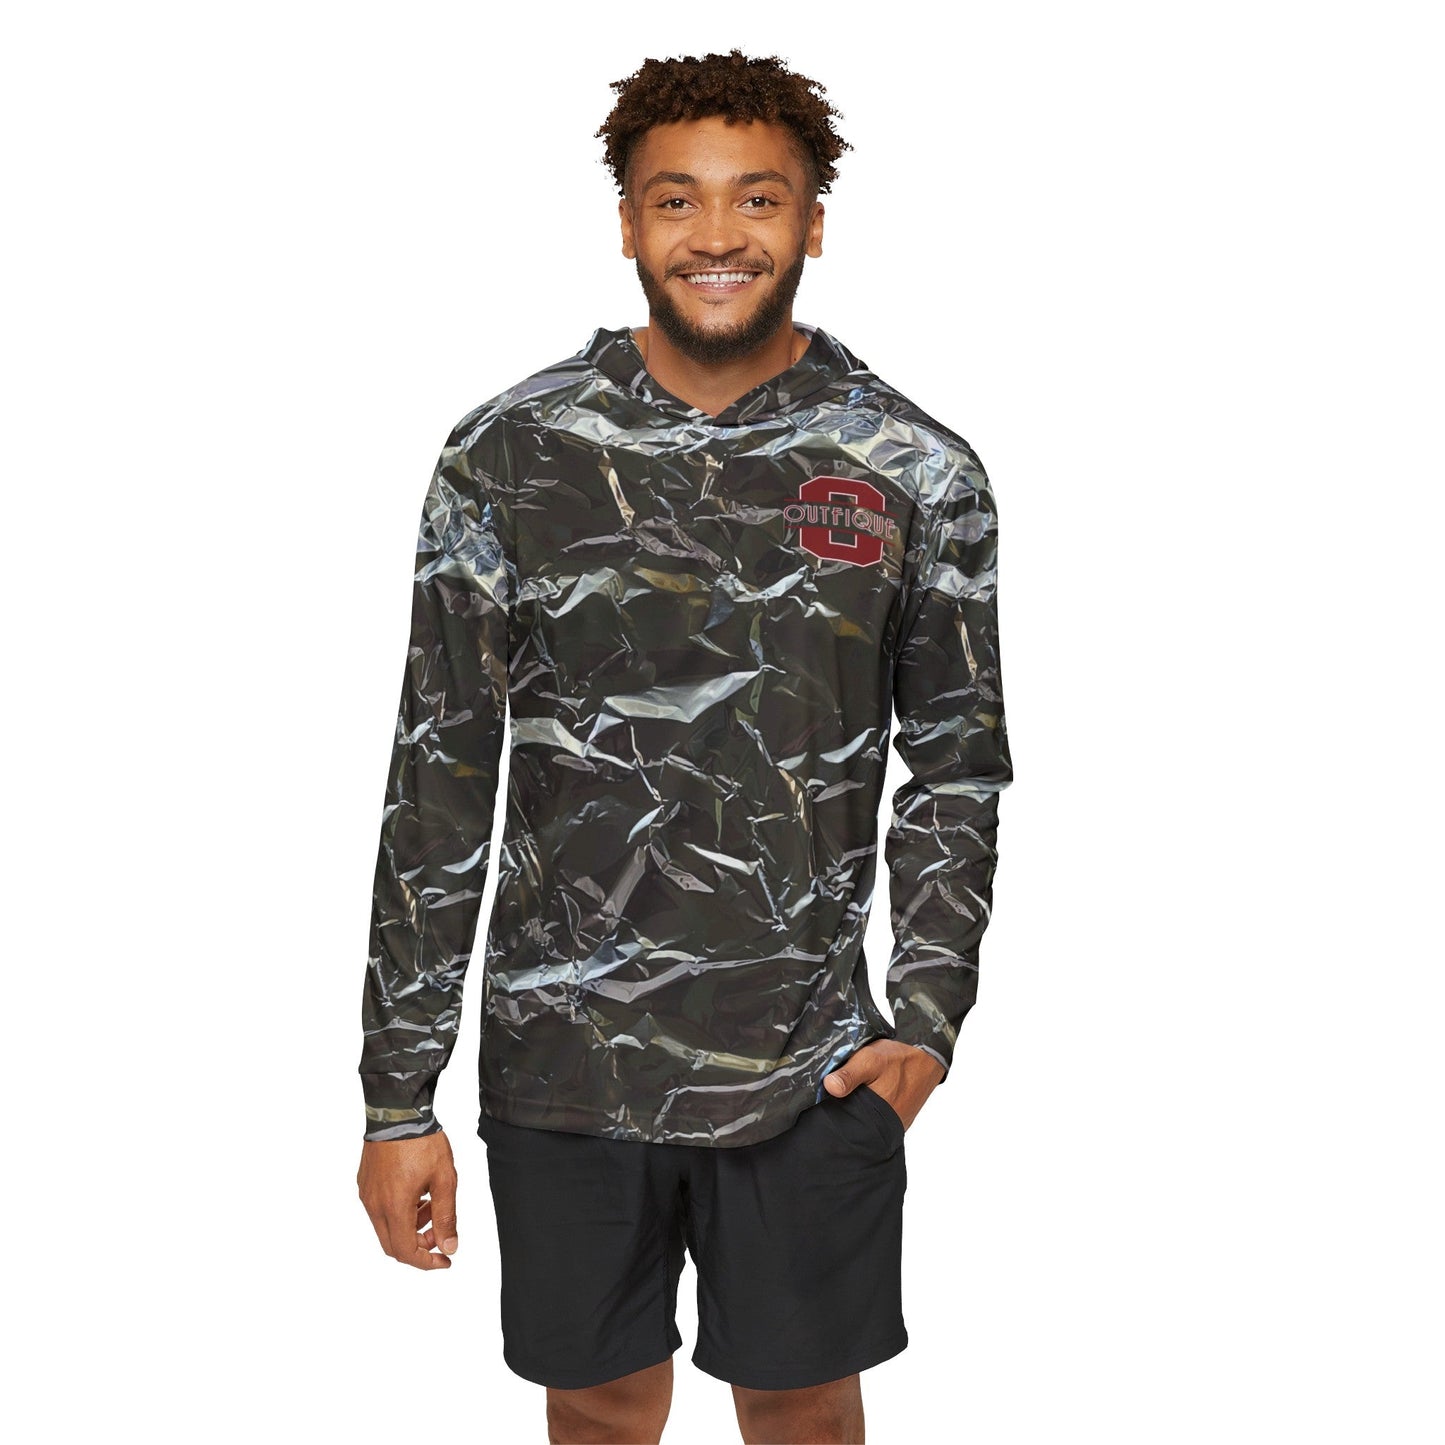 OUTFIQUE 'O' Sports Warmup Hoodie | Outfique | All Over Prints | AOP